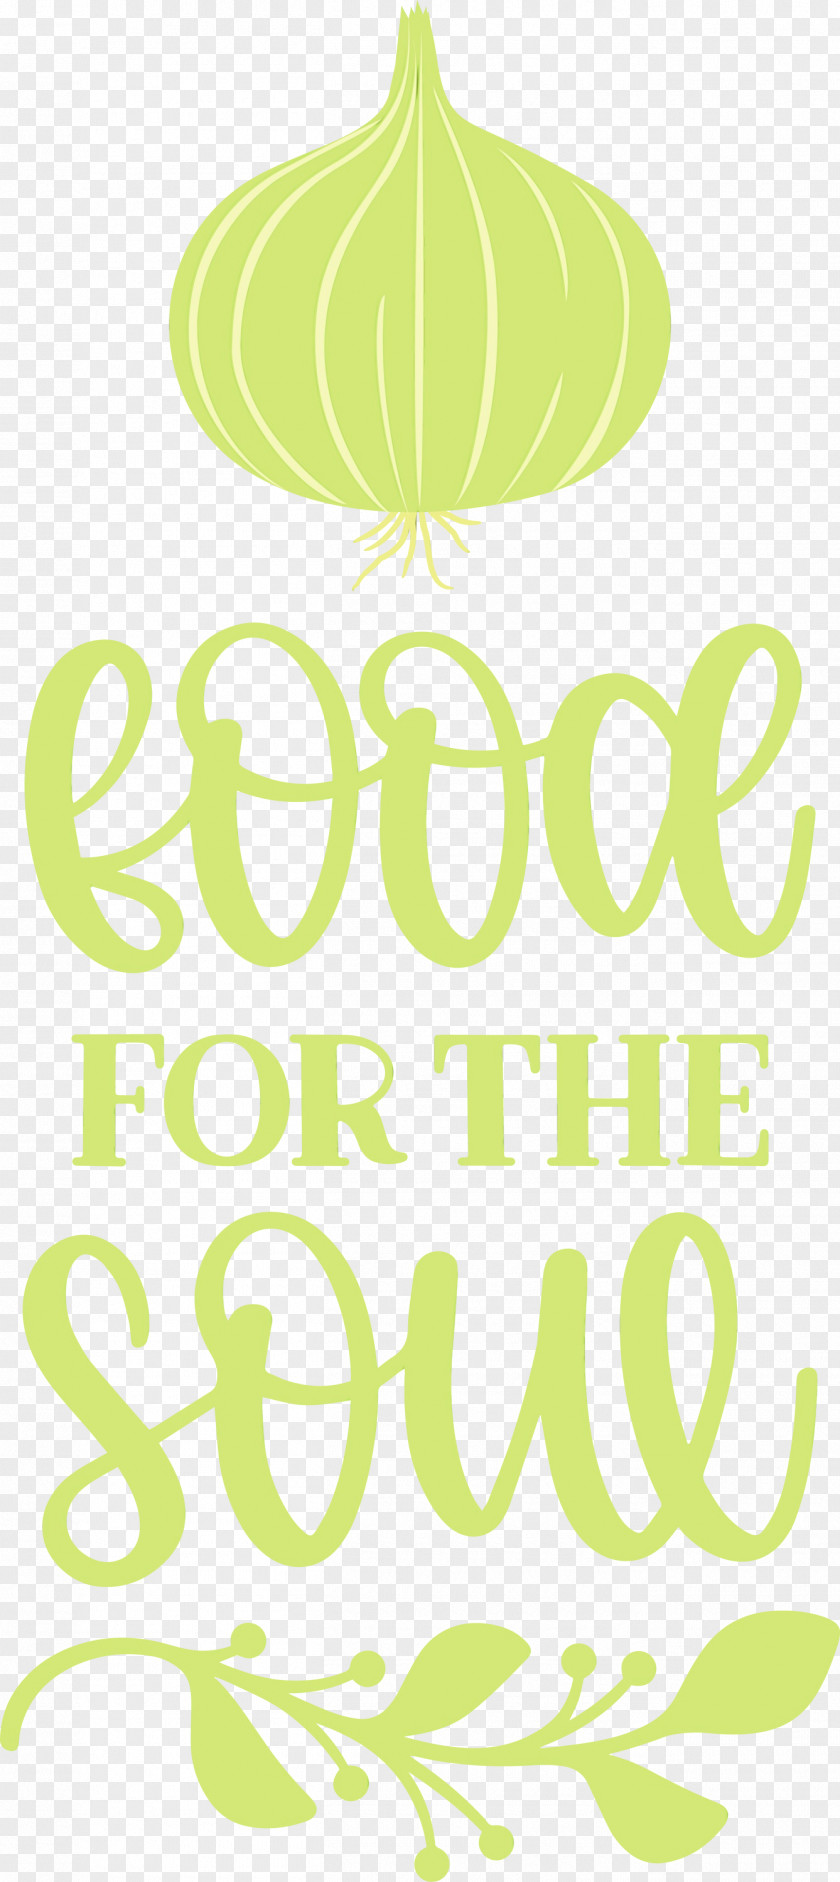 Royalty-free Poster Vector PNG